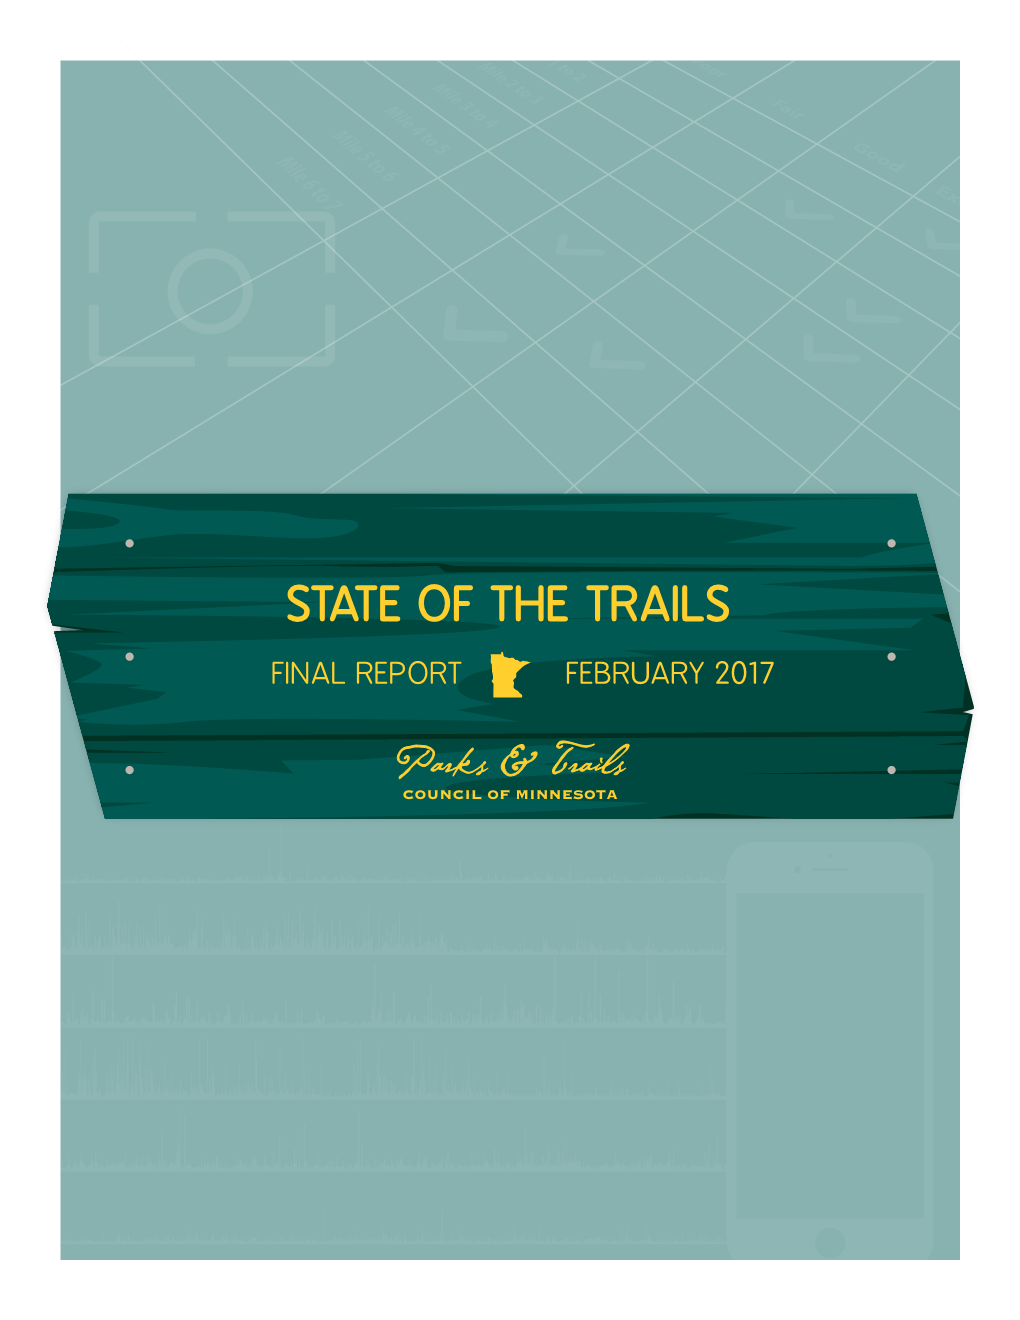 State of the Trails Final Report February 2017